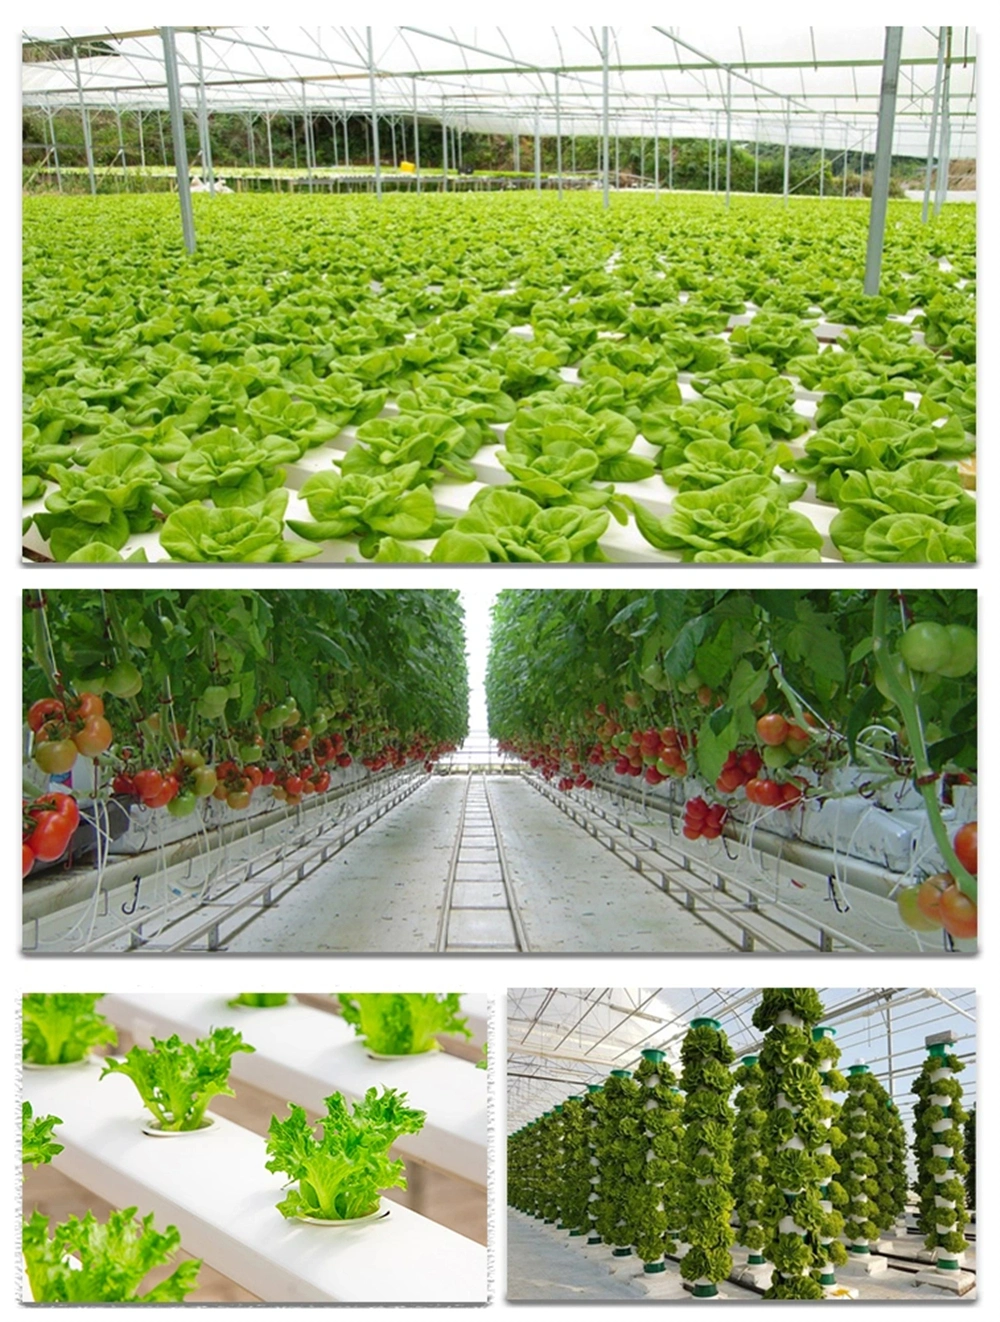 Multi-Span Tunnel/Arch Film Greenhouse with Soilless Hydroponics Systems Forlettuce/Pepper/Mushroom/Cucumber/Tomato